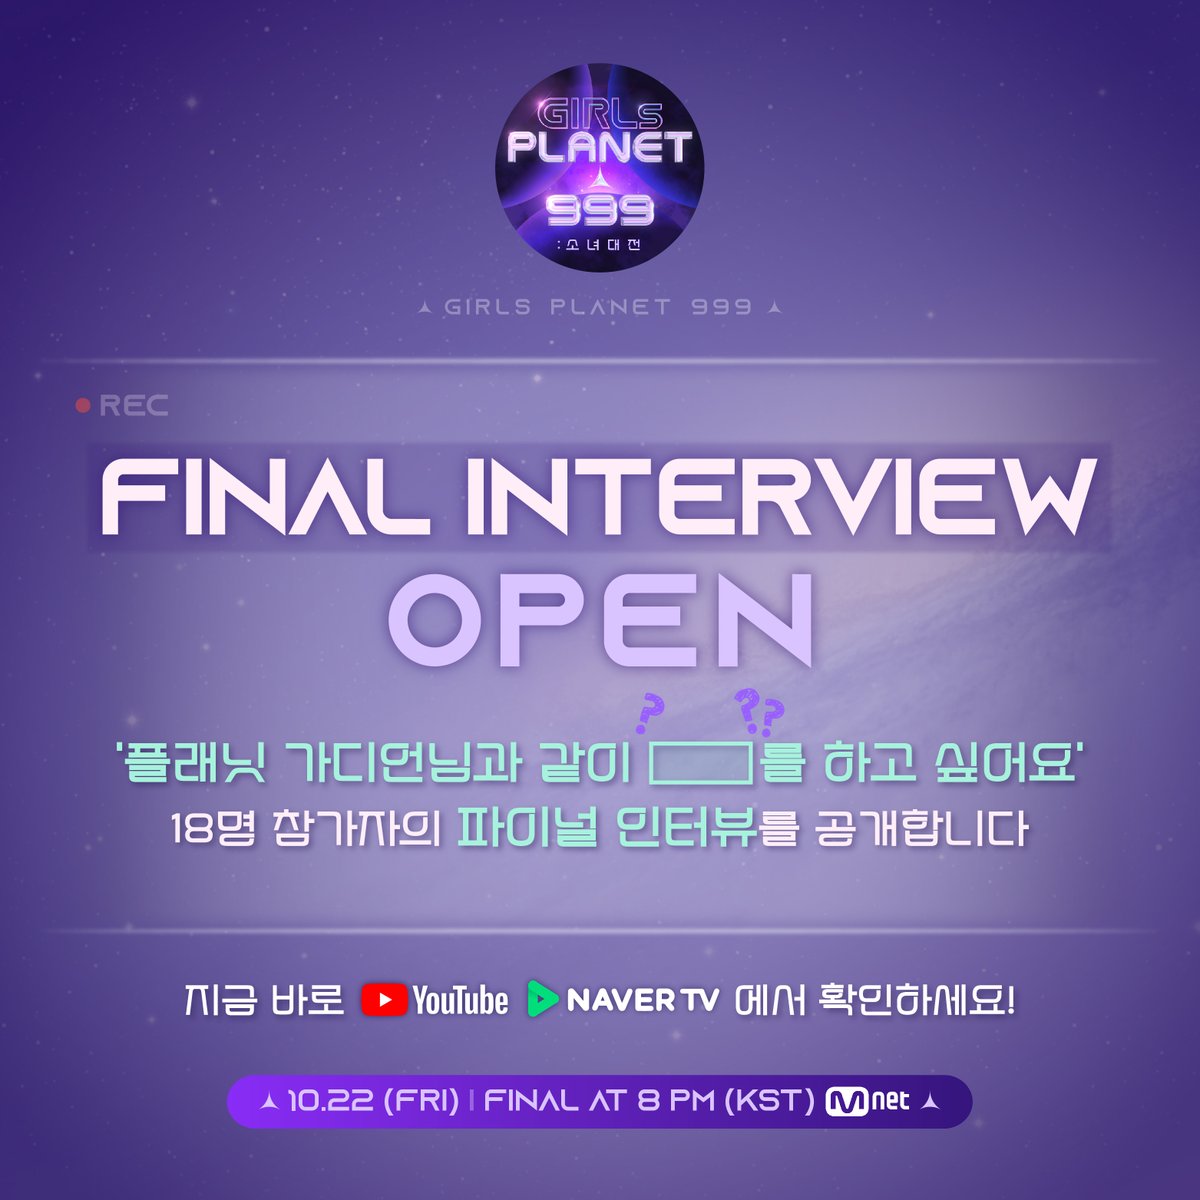 [#GirlsPlanet999] 💌The Final Interview from the Participants has Arrived💌

▼Check the Final Interview▼
NAVER TV <Girls Planet 999 : The Girls Saga>
: tv.naver.com/cjenm.girlspla……
YouTube <Mnet K-POP>
: youtube.com/Mnet

10.22 (Fri) Final at 8 PM (KST)